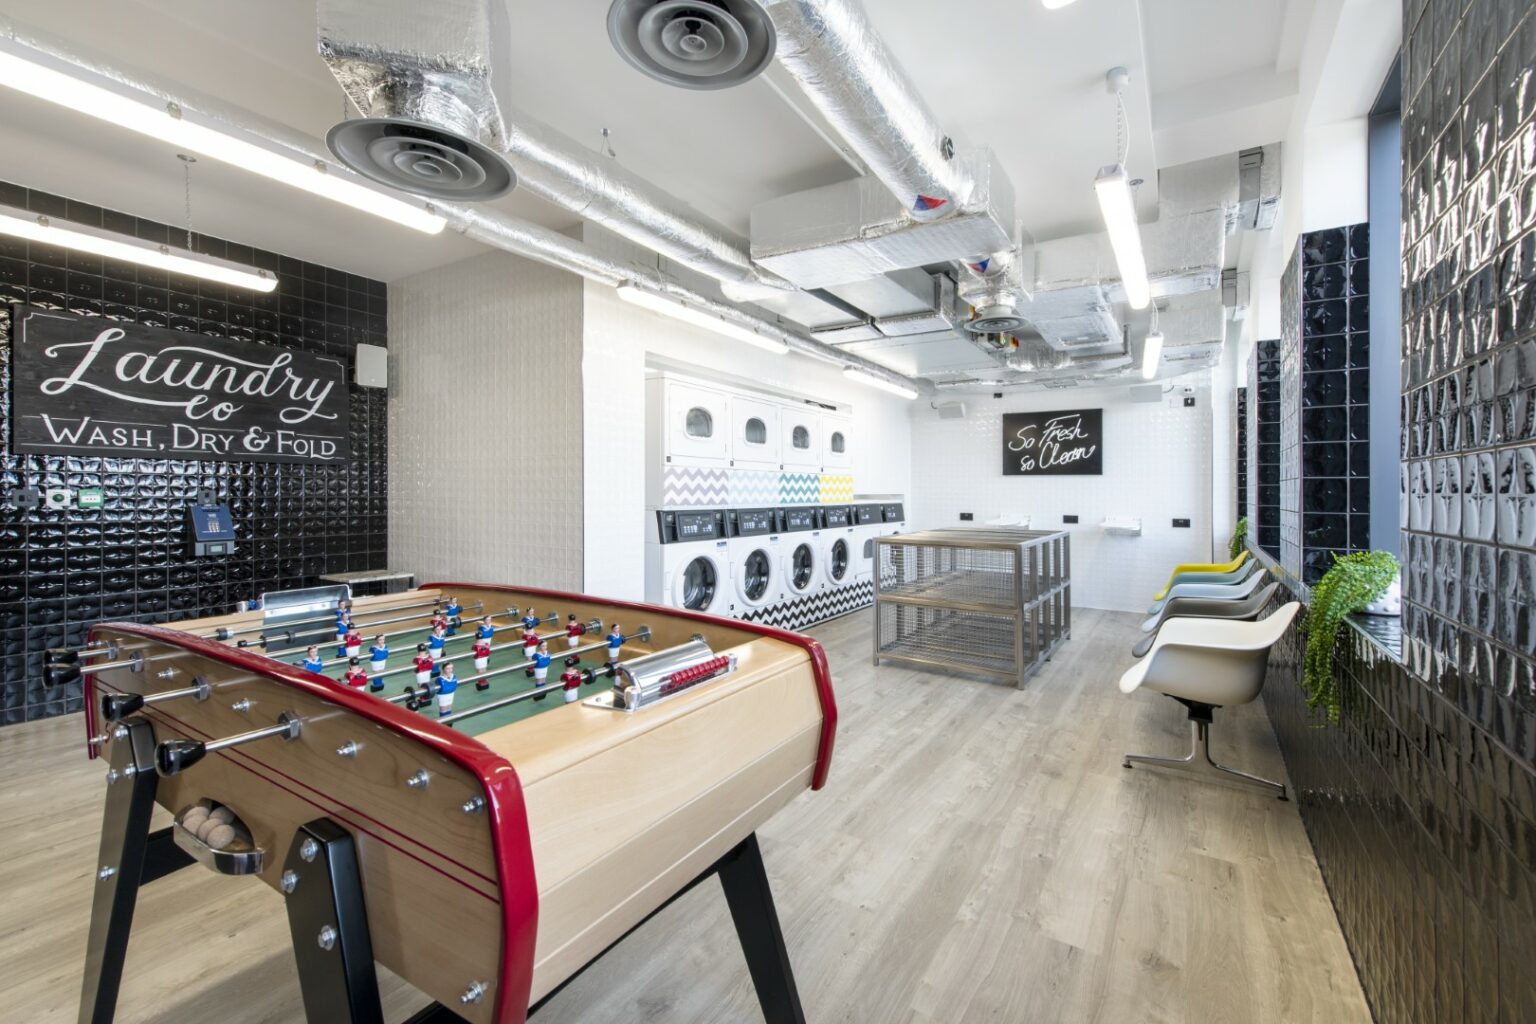 Games and Laundry Room interior